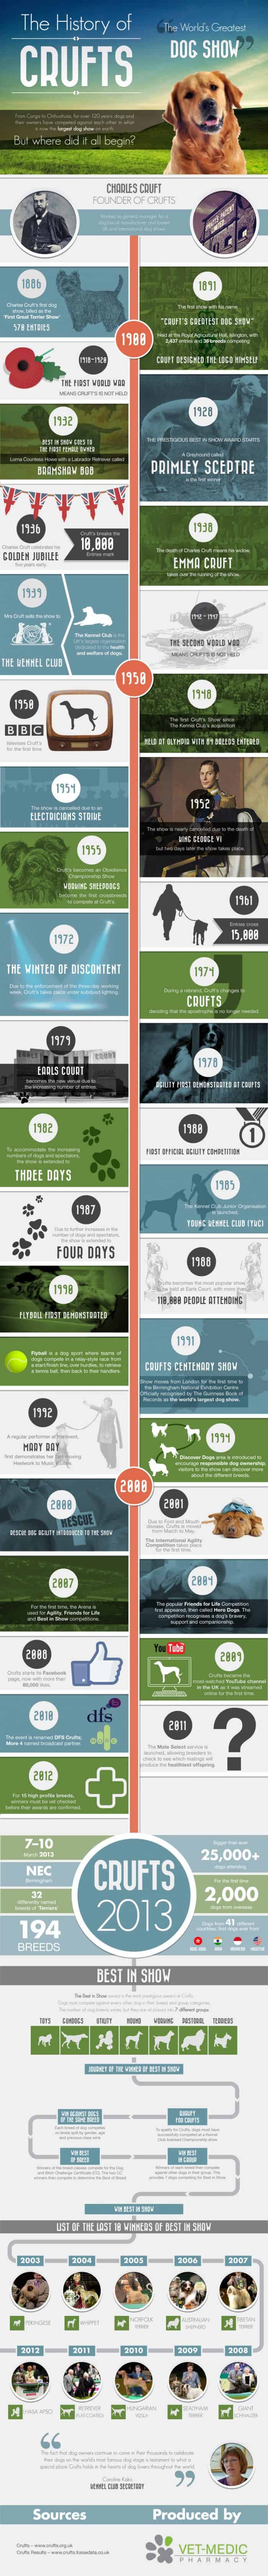 History of crufts infographic